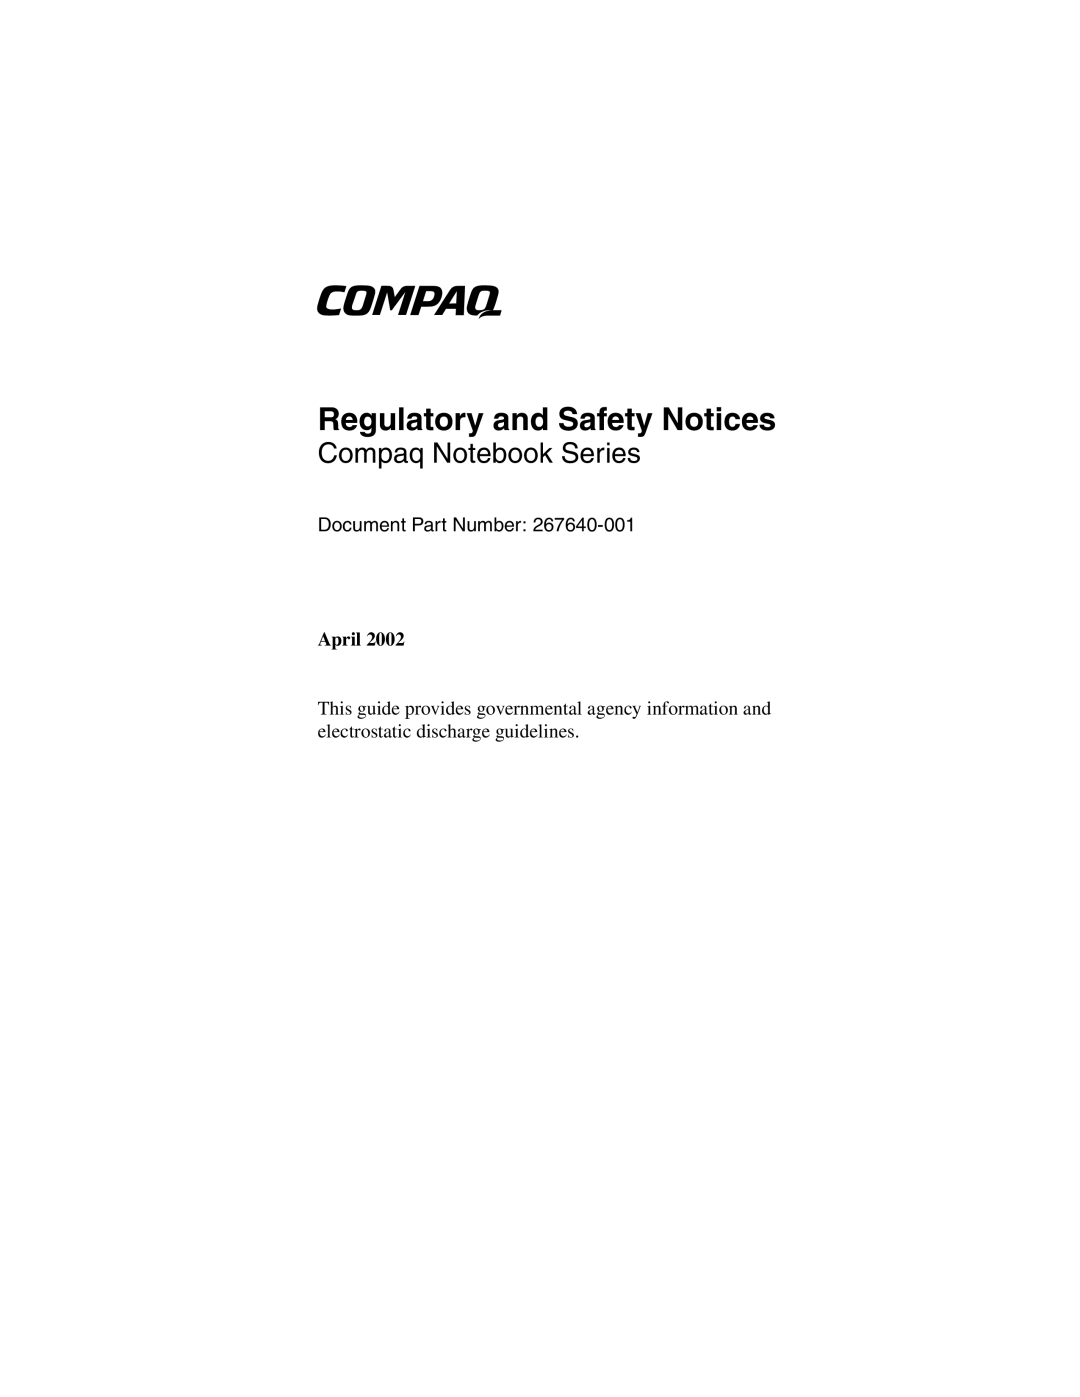 HP 2897AP, 2899AP, 2896AP, 2898AP, 2895AP, 2892AP, 2891AP, 2894AP, 2889AP, 2887AP, 2888AP manual Regulatory and Safety Notices 